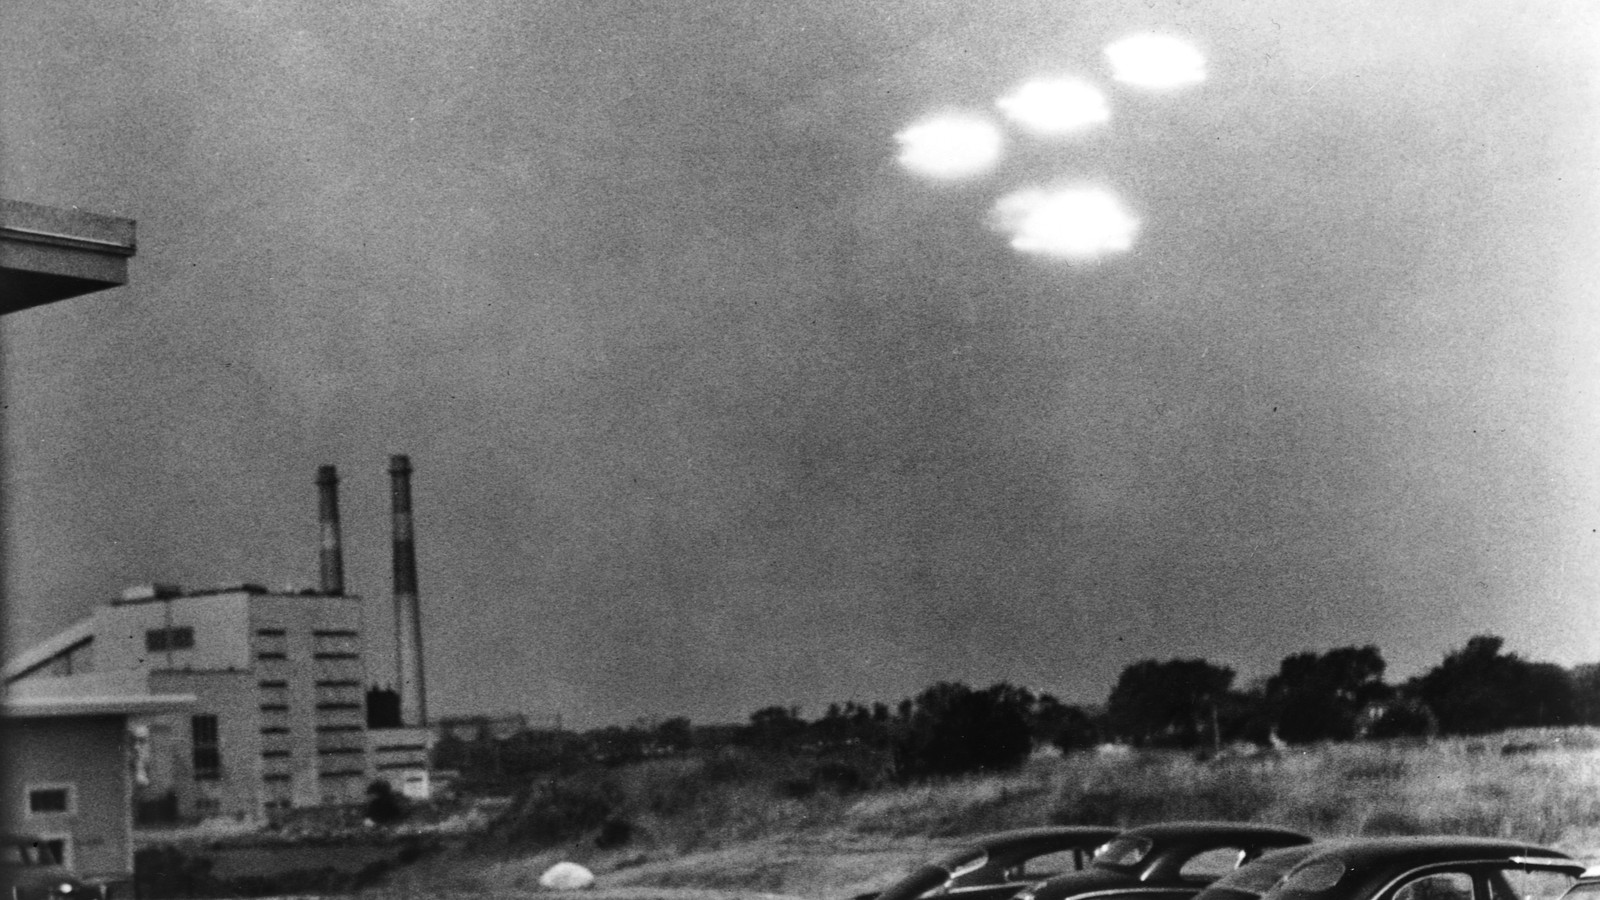 Leave Aliens Out of the UFO Story - The Atlantic